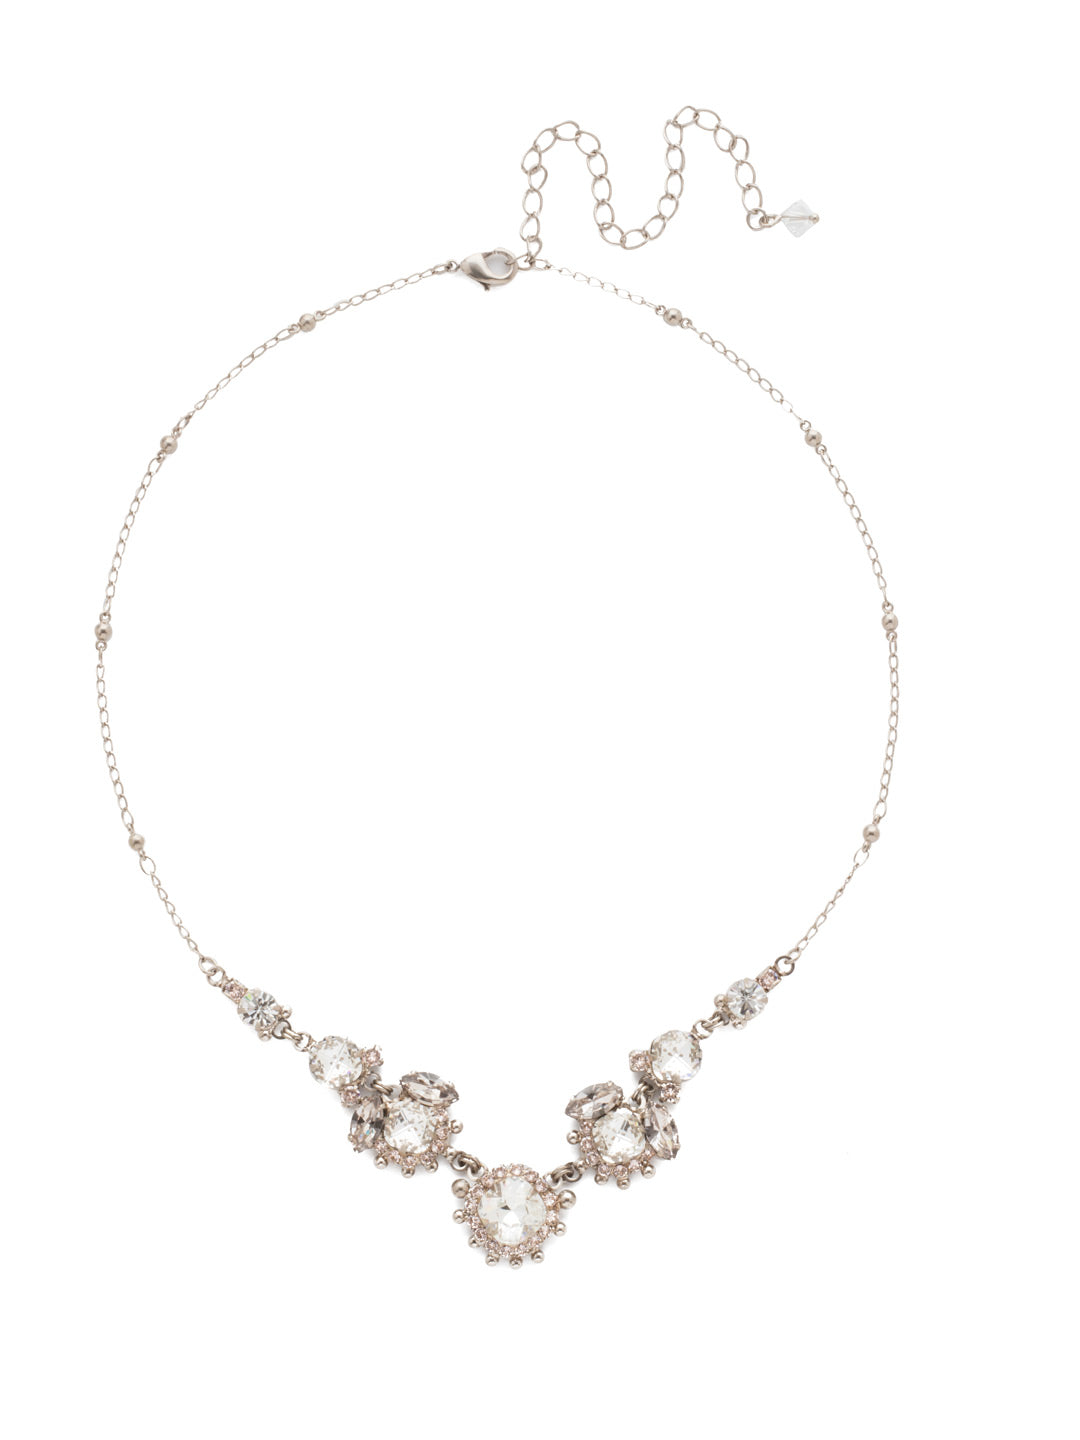 California Poppy Statement Necklace - NDU9ASPLS - <p>Elegance abounds with this assortment of round and navette crystal clusters adorned with metal ball details on a decorative chain. From Sorrelli's Soft Petal collection in our Antique Silver-tone finish.</p>